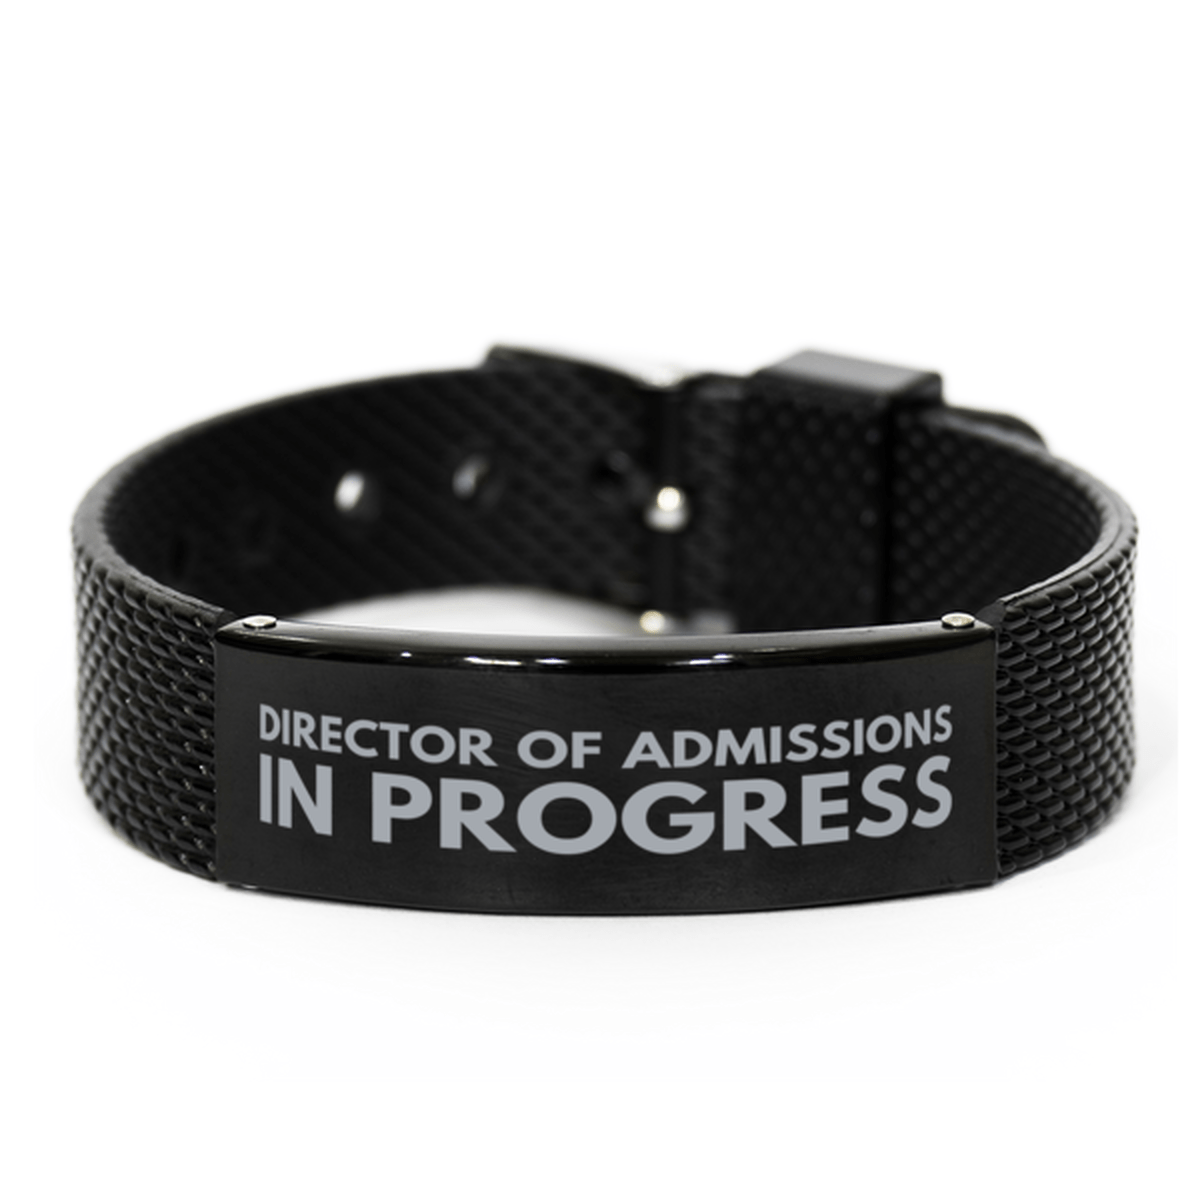 Inspirational Director Of Admissions Black Shark Mesh Bracelet, Director Of Admissions In Progress, Best Graduation Gifts for Students